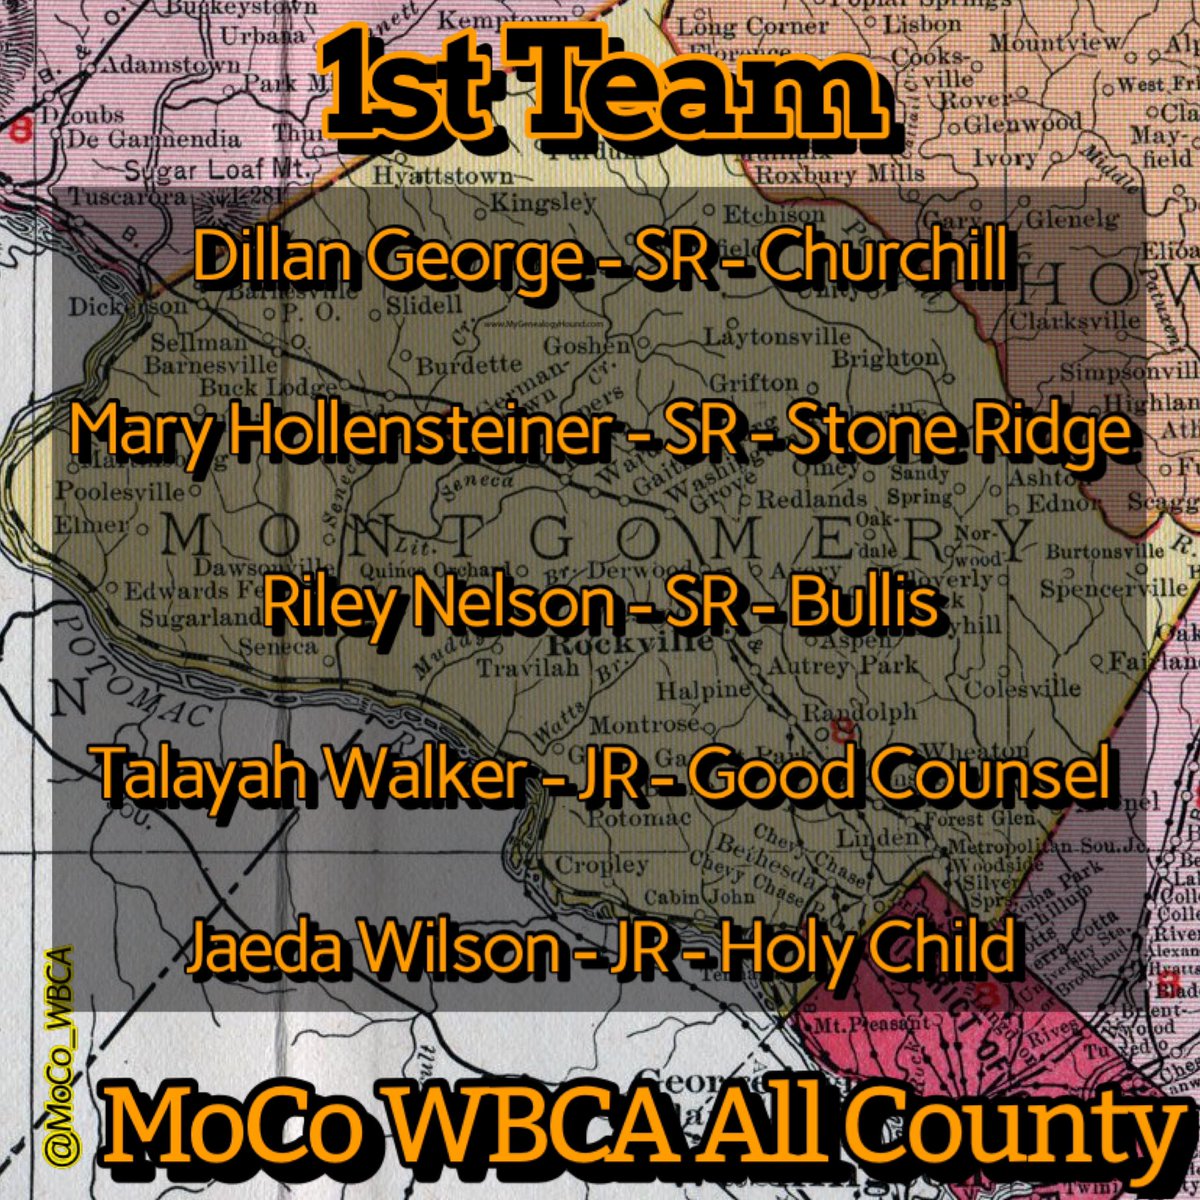 1st team #MoCoWBCA #AllCounty - skilled, stat stuffing players!

George - 19.3 PPG, 5.1 RPG, 4.9 APG
Hollensteiner - 20+ PPG, 5+ RPG
Nelson - 16.6 PPG, 10.9 RPG, 2.5 APG
Walker - 20+ PPG, 6+ RPG
Wilson - 14 PPG, 4 RPG, 3 APG

👏 Dillan, Riley, & Mary on incredible HS careers! 👍